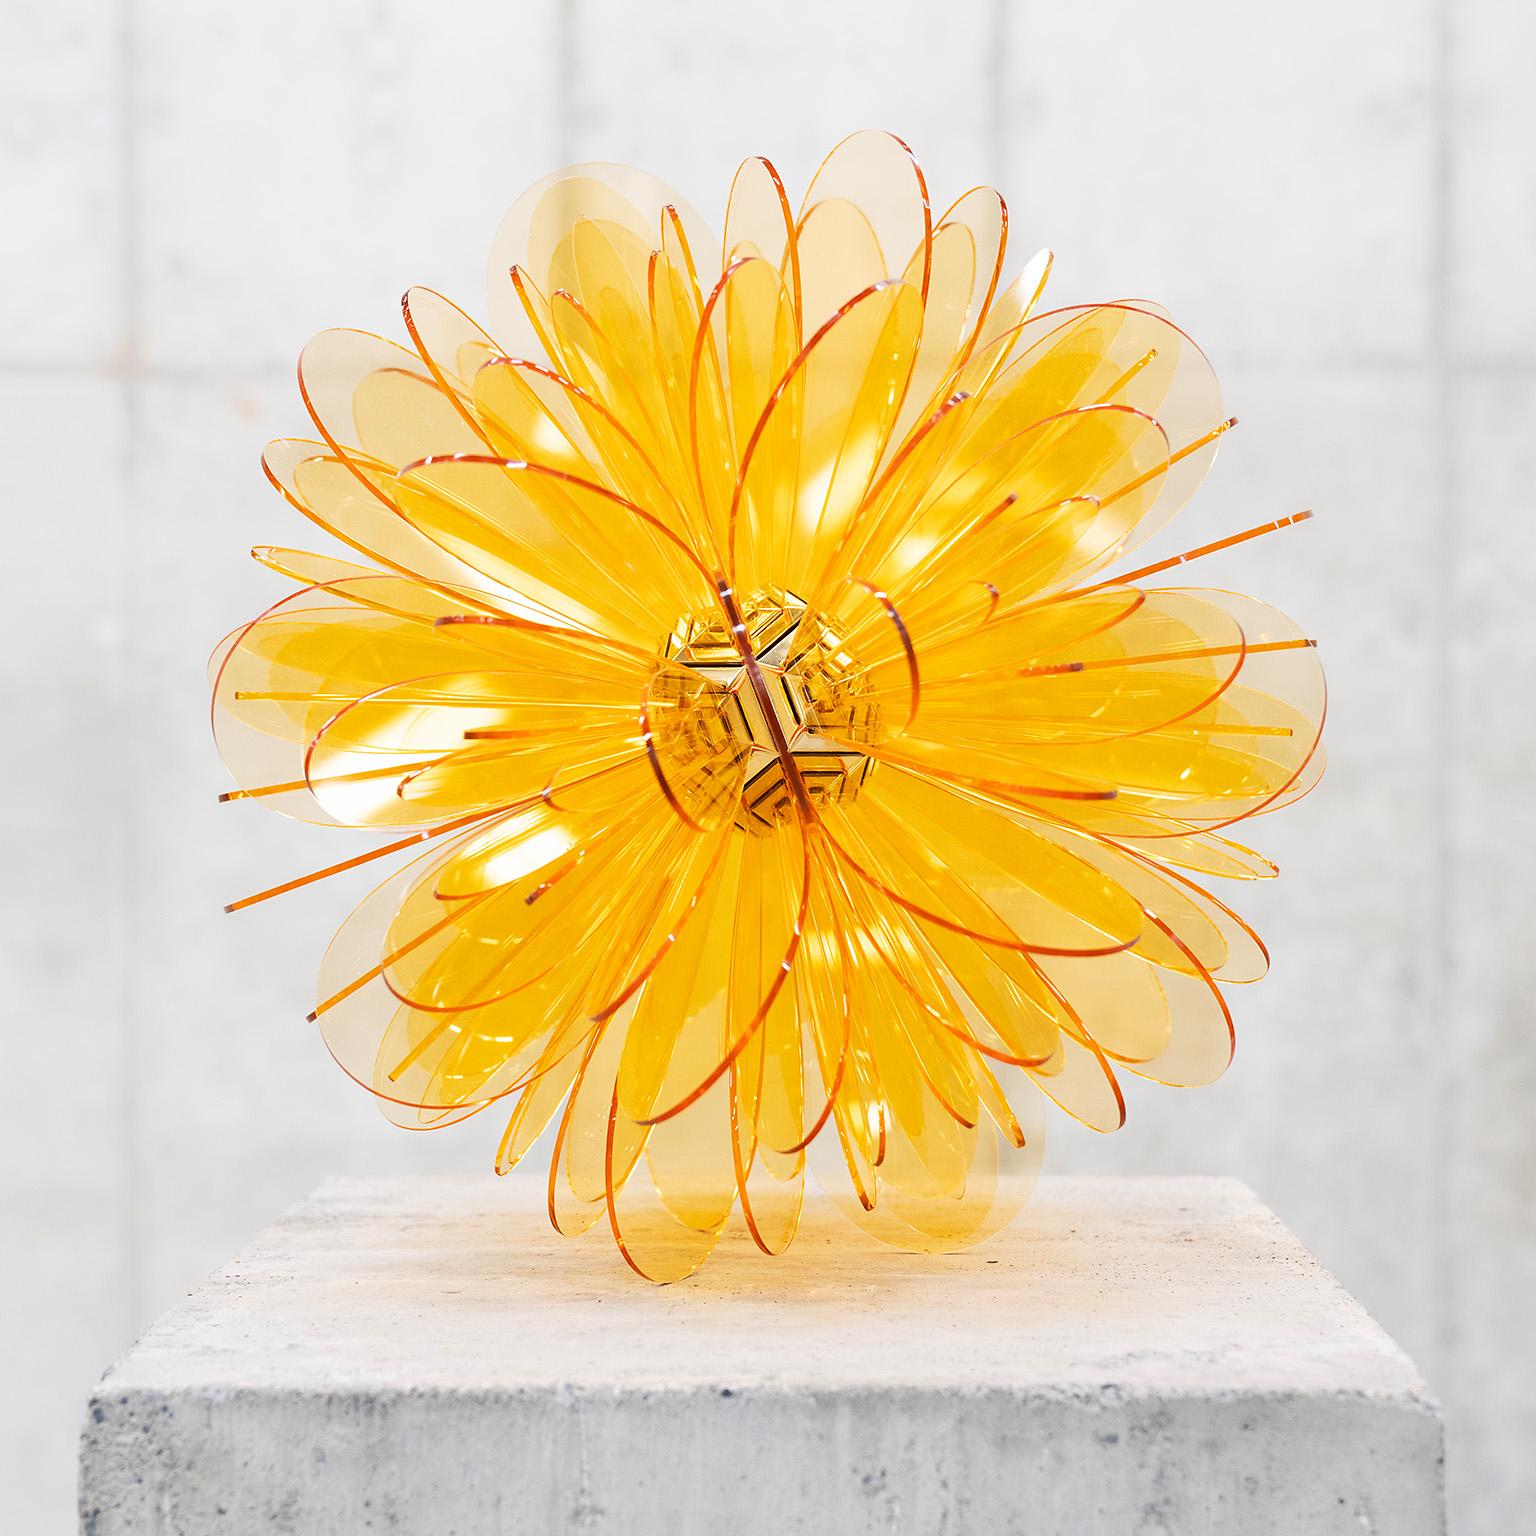 Norman Mooney Abstract Sculpture - "Bloom No. 8" from the Bloom Series, Abstract, Organic Sculpture, Yellow Acrylic